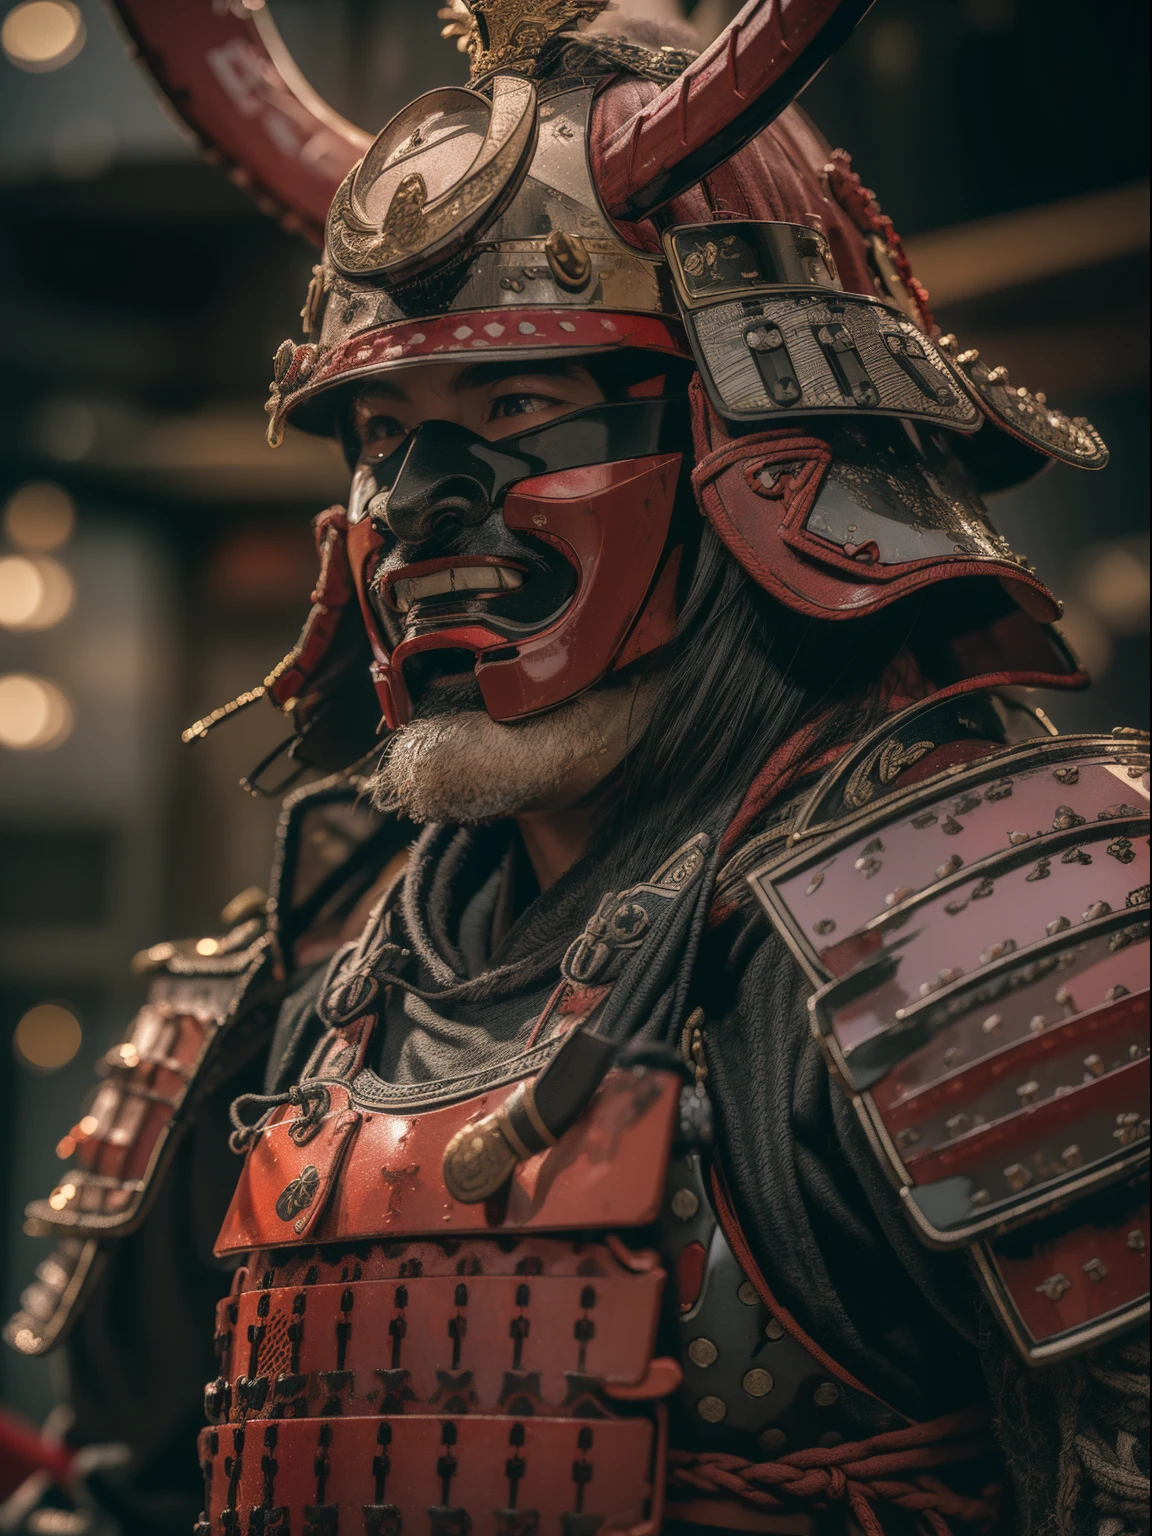 (masterpiece, ultra-high resolution:1.4), (photo of a sengoku daimyo samurai branding a katana with cuirass and helmet:1.3), katana on both hands, face highly detailed, (japanese heritage samurai armor and helm), (tall stature and muscular body:1.4), (Sony Alpha 1 camera, renowned for capturing the highest level of detail in a photo:1.3), (the samurai's face with perfect symmetry and flawless features:1.2), (black and red armor and helmet:1.3), (standing with a commanding presence amidst the battlefield:1.1), emphasize of the daimyo armor, Cinematic, Hyper-detailed, insane details, Beautifully color graded, Unreal Engine, DOF, Super-Resolution, Megapixel, Cinematic Lightning, Anti-Aliasing, FKAA, TXAA, RTX, SSAO, Post Processing, Post Production, Tone Mapping, CGI, VFX, SFX, Insanely detailed and intricate, Hyper maximalist, Hyper realistic, Volumetric, Photorealistic, ultra photoreal, ultra-detailed, intricate details, 8K, Super detailed, Full color, Volumetric lightning, HDR, Realistic, Unreal Engine, 16K, Sharp focus, Octane render